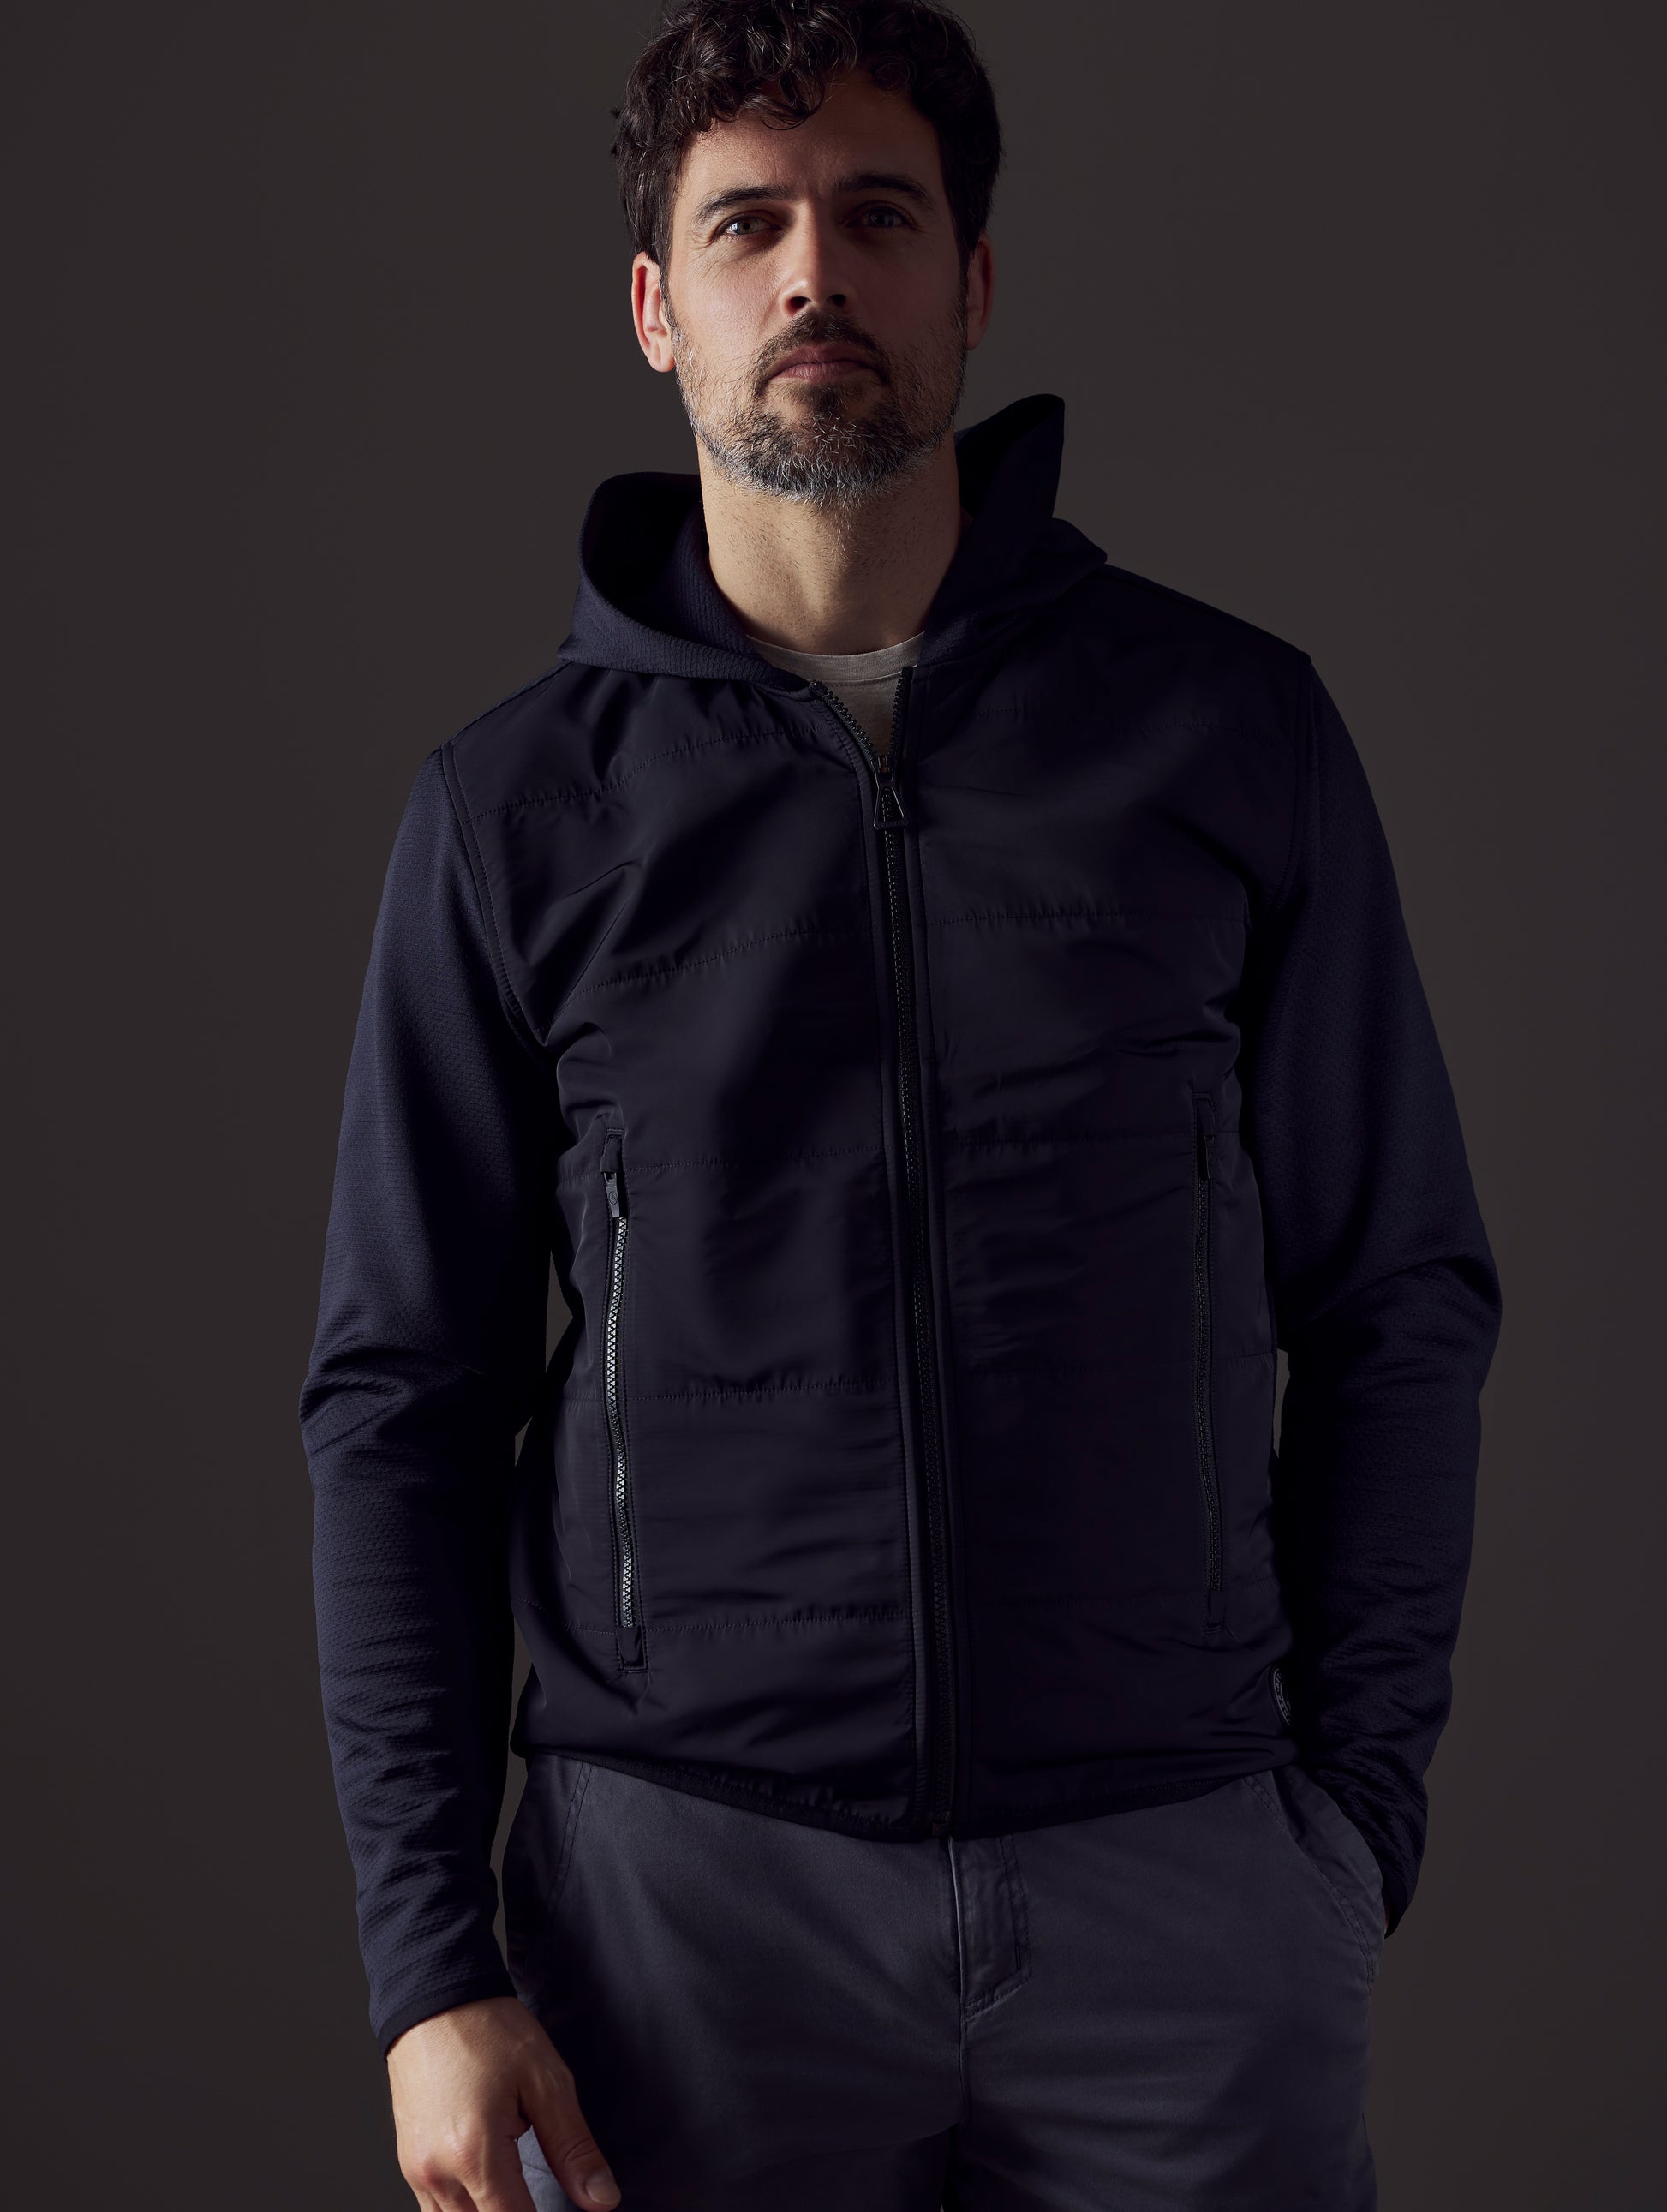 Man wearing black full-zip from AETHER Apparel